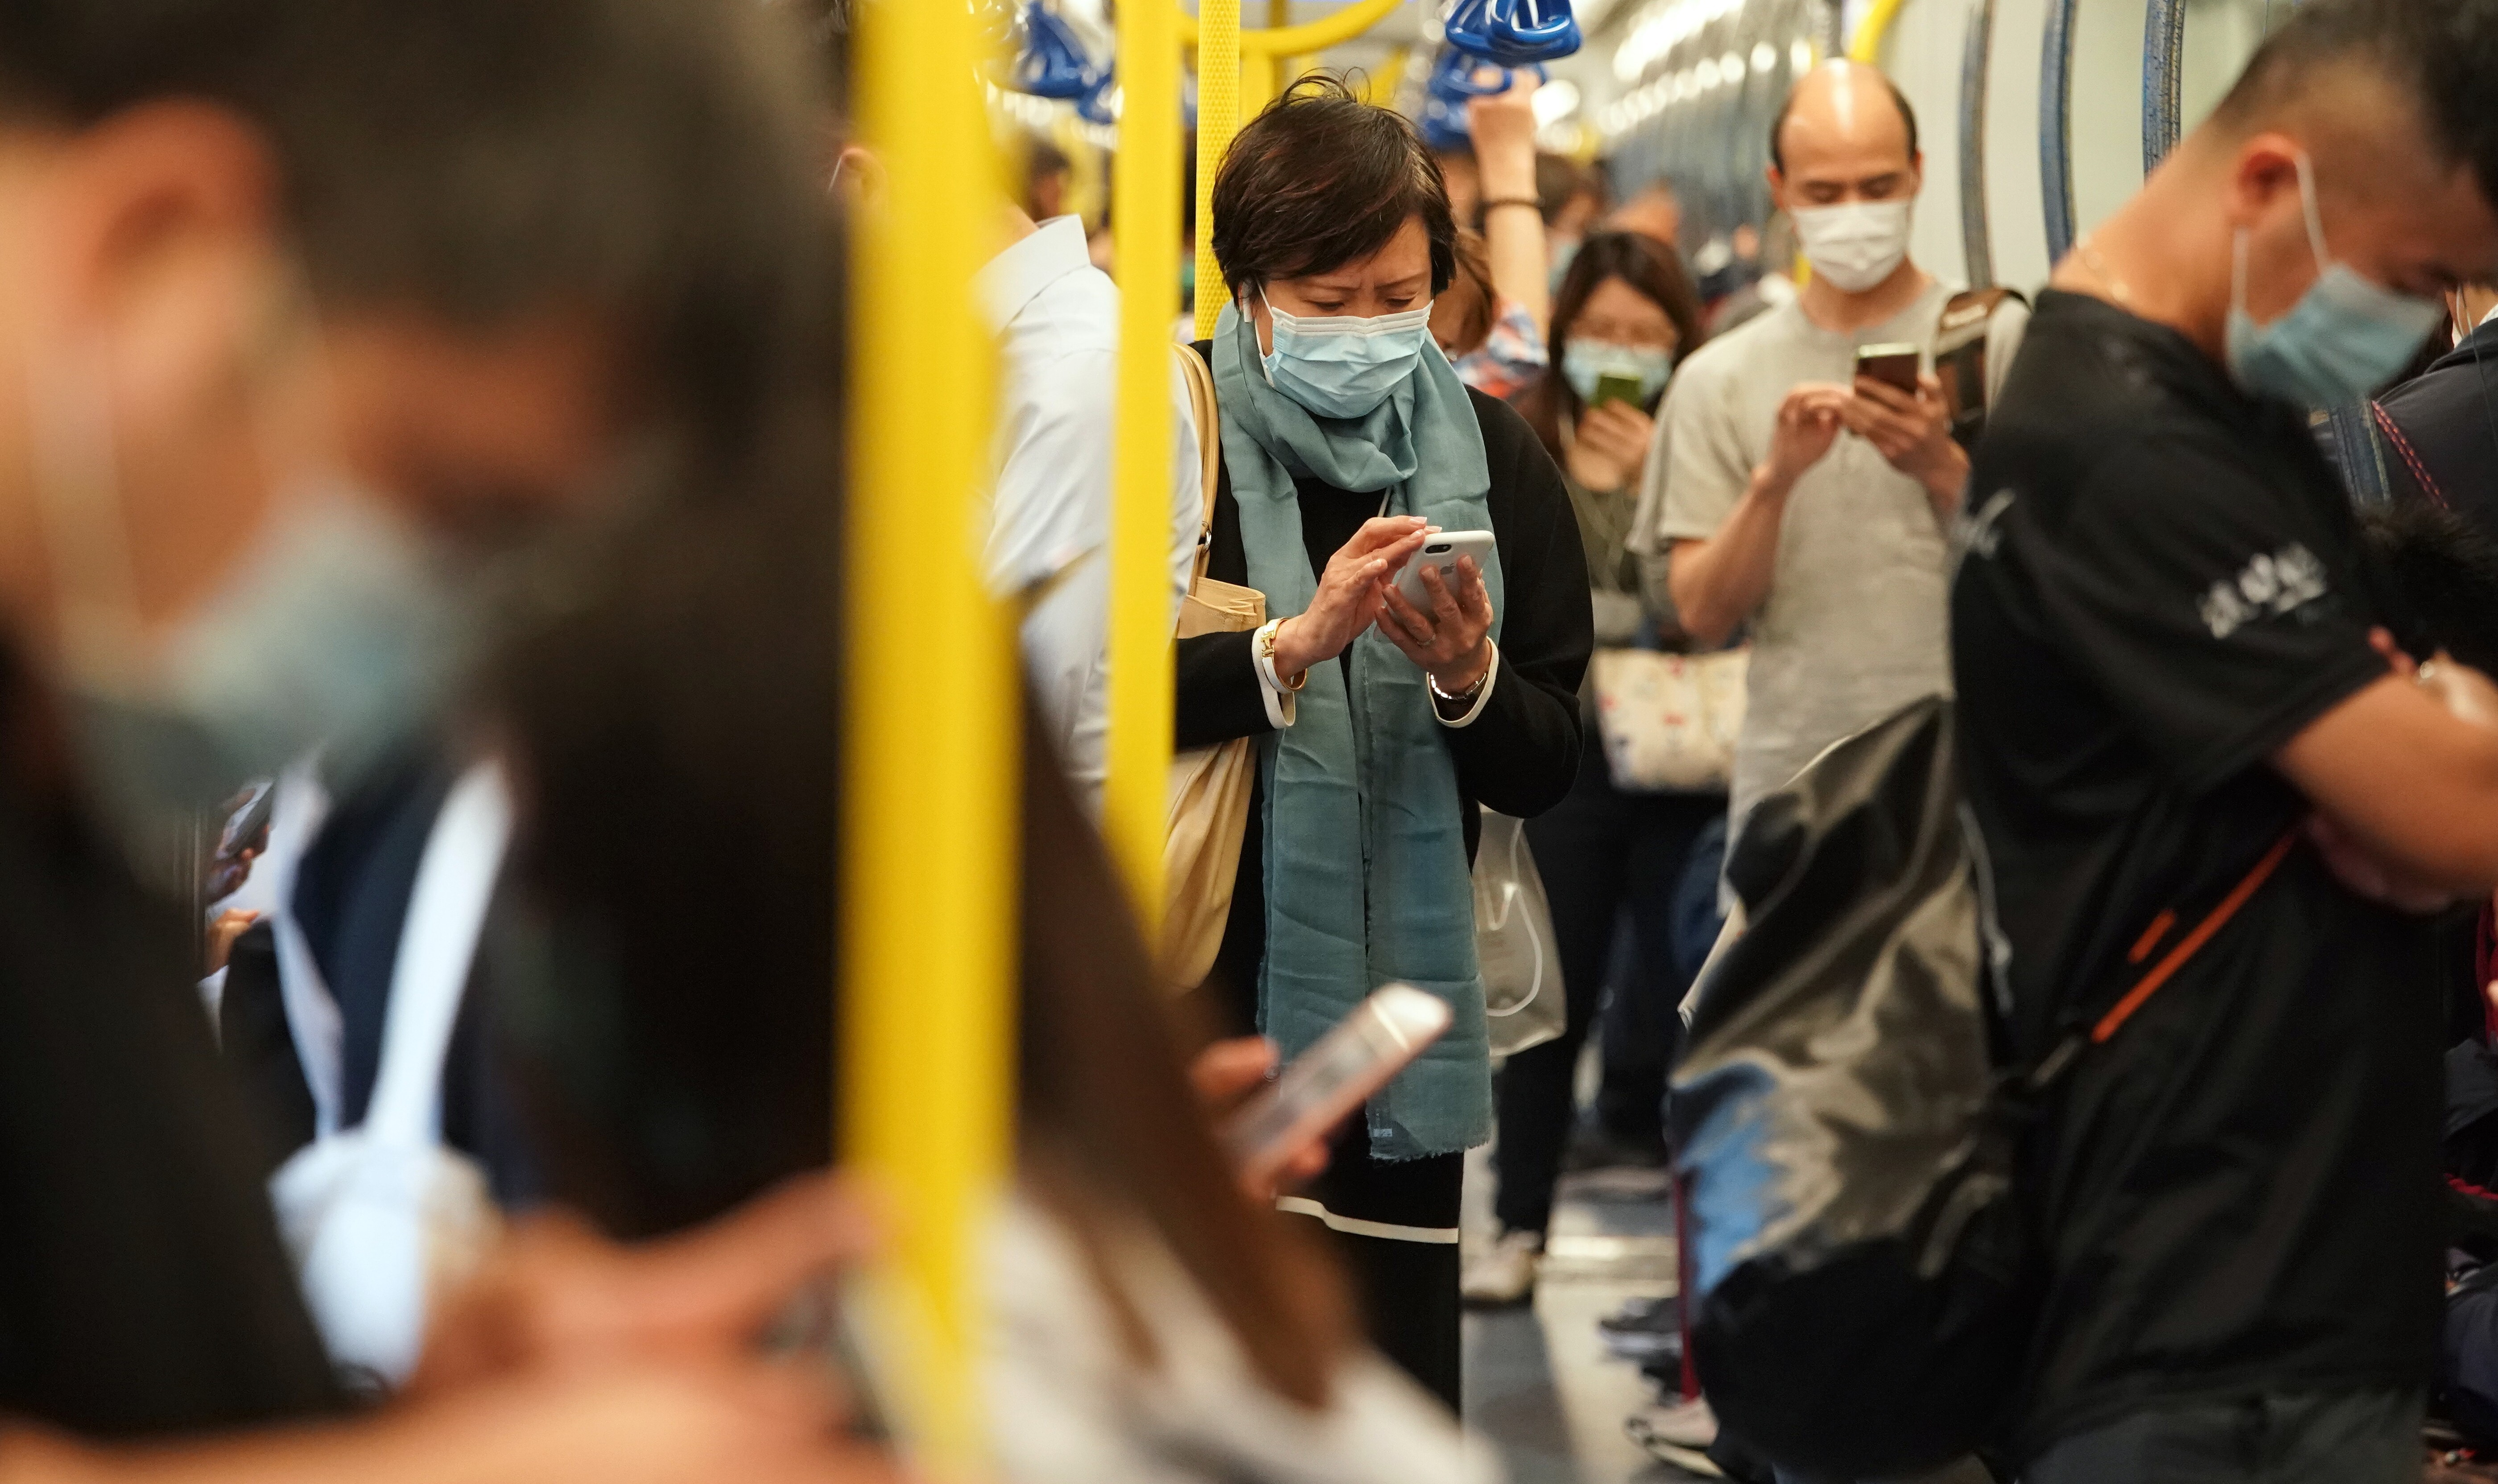 Most of us spend more than three hours a day on our smartphones. Photo: SCMP/Felix Wong